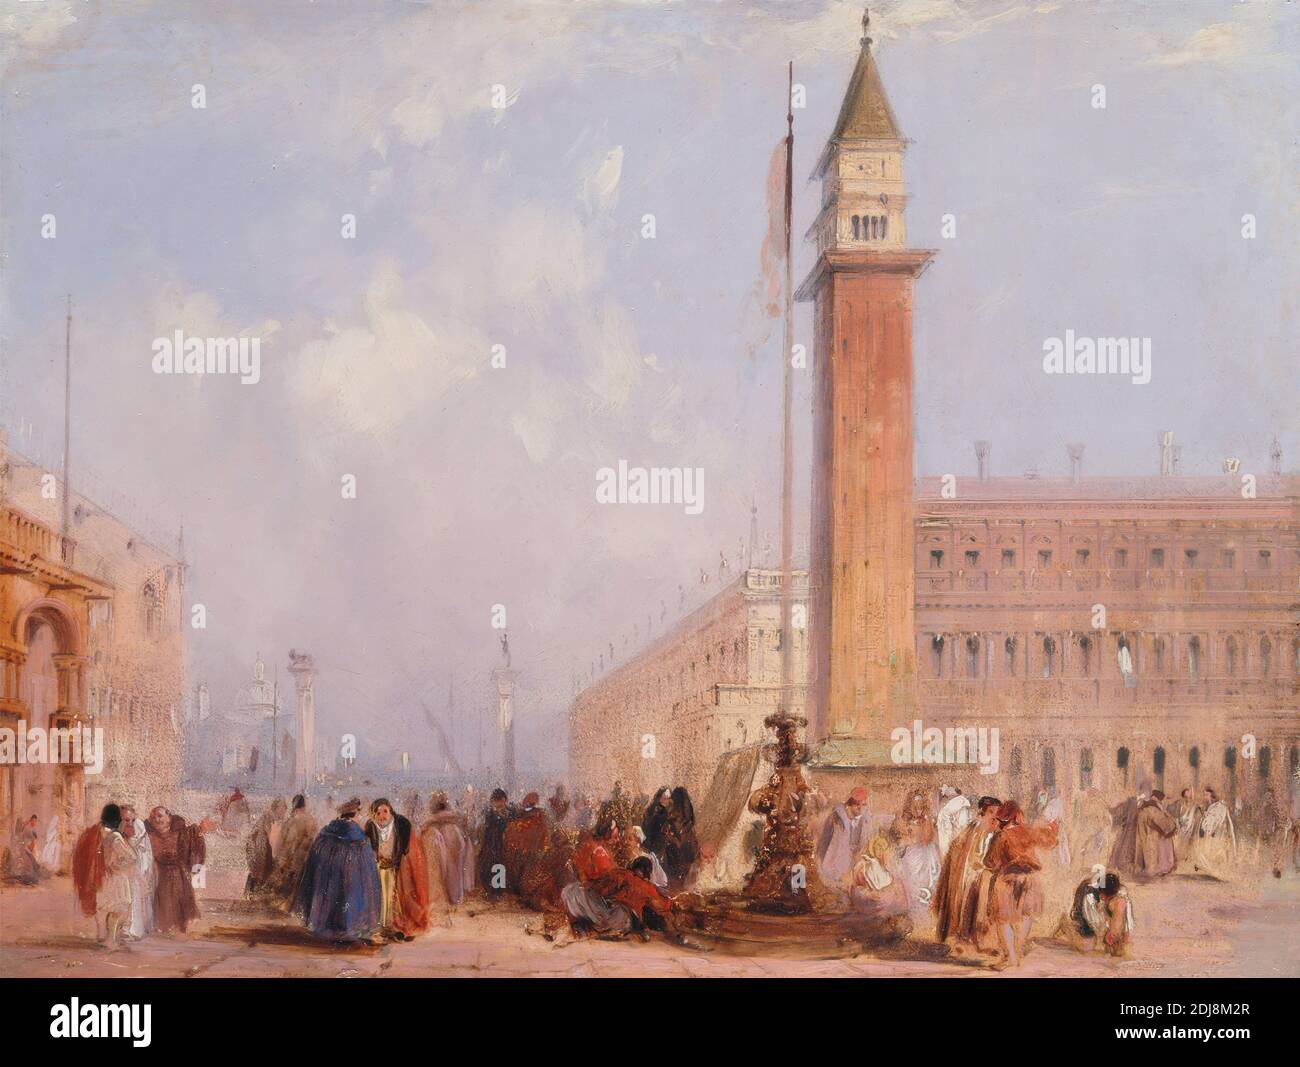 The Piazzetta, Venice, Edward Pritchett, active ca. 1828–1864, British, mid-19th century, Oil on board, Support (PTG): 5 3/4 x 8 inches (14.6 x 20.3 cm), architectural subject, architecture, campanile, city, cityscape, doge, ducal palace, flag, flagpole, fountain, genre subject, meeting, men, palace, piazza, tower (building division), women, Italy, Piazzetta di San Marco, Veneto, Venezia, Venice Stock Photo